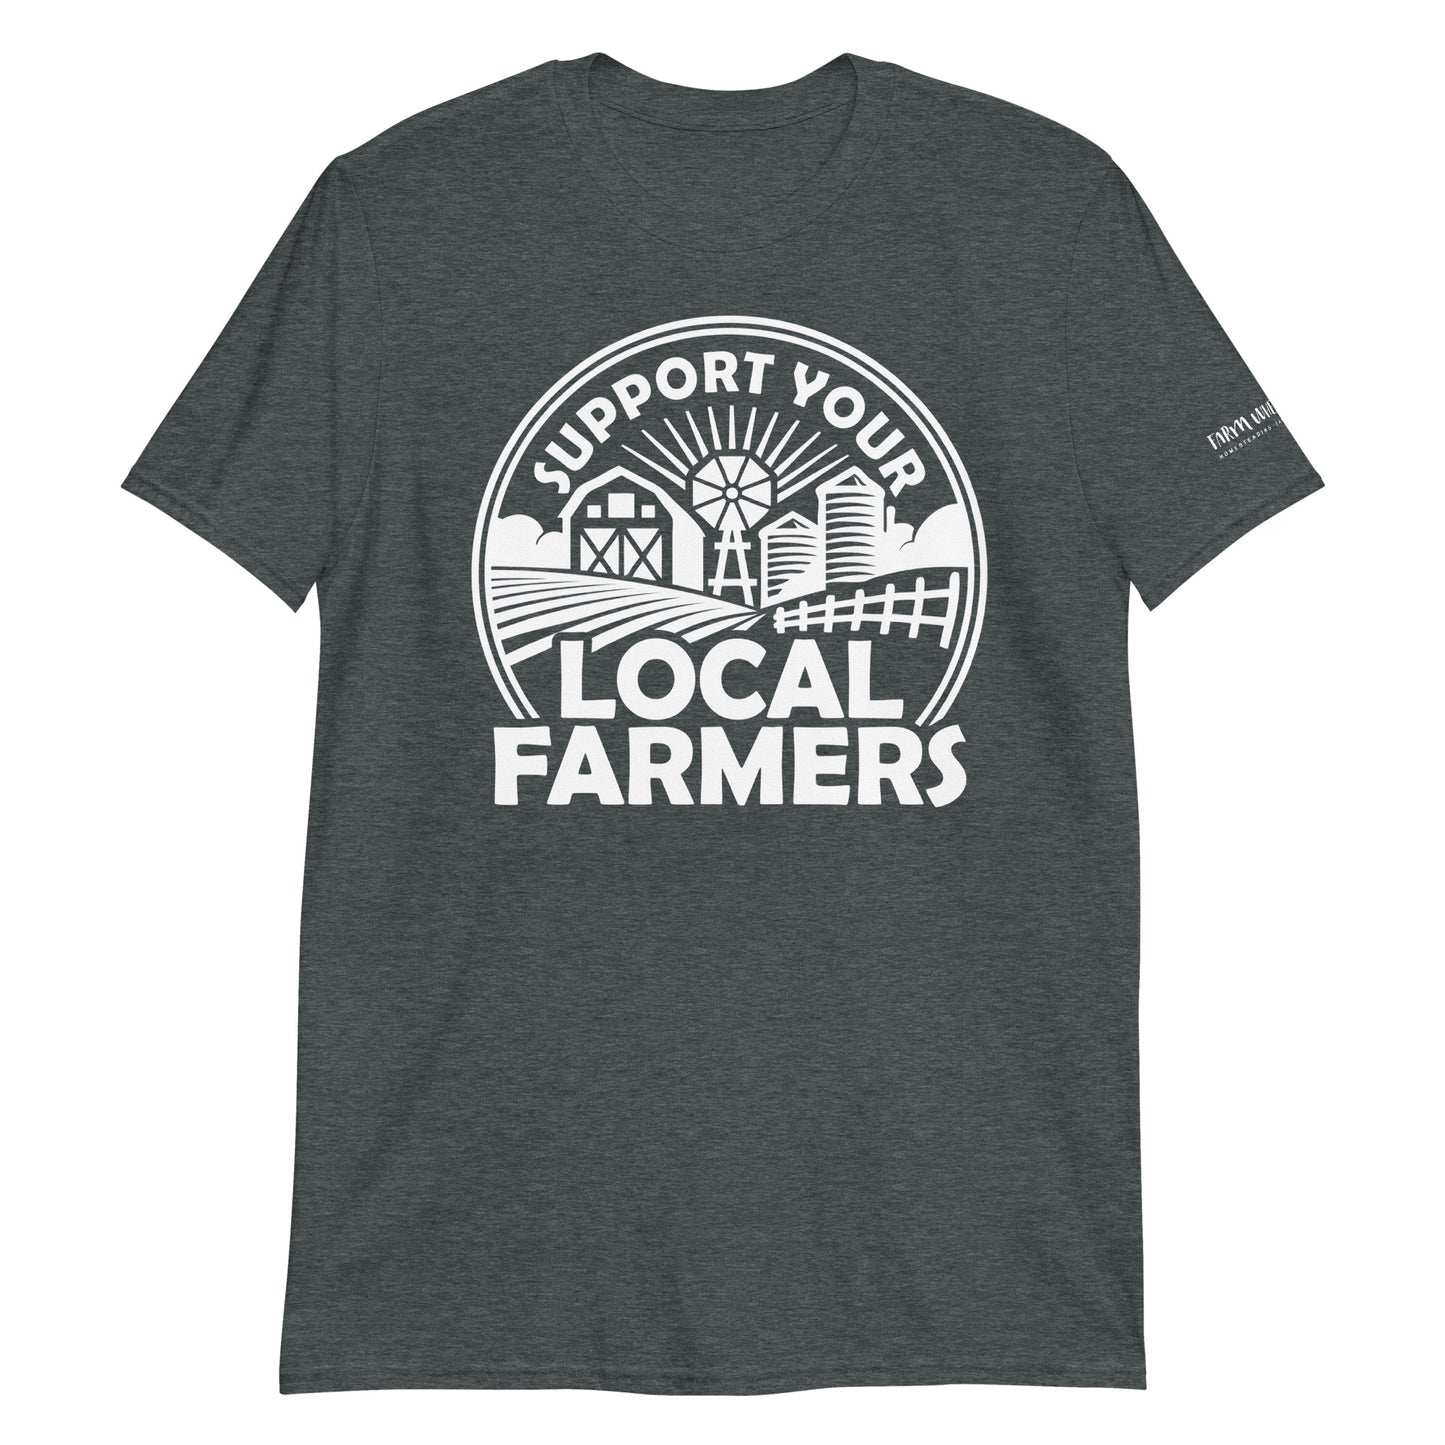 Support Your Local Farmer Short-Sleeve T-Shirt